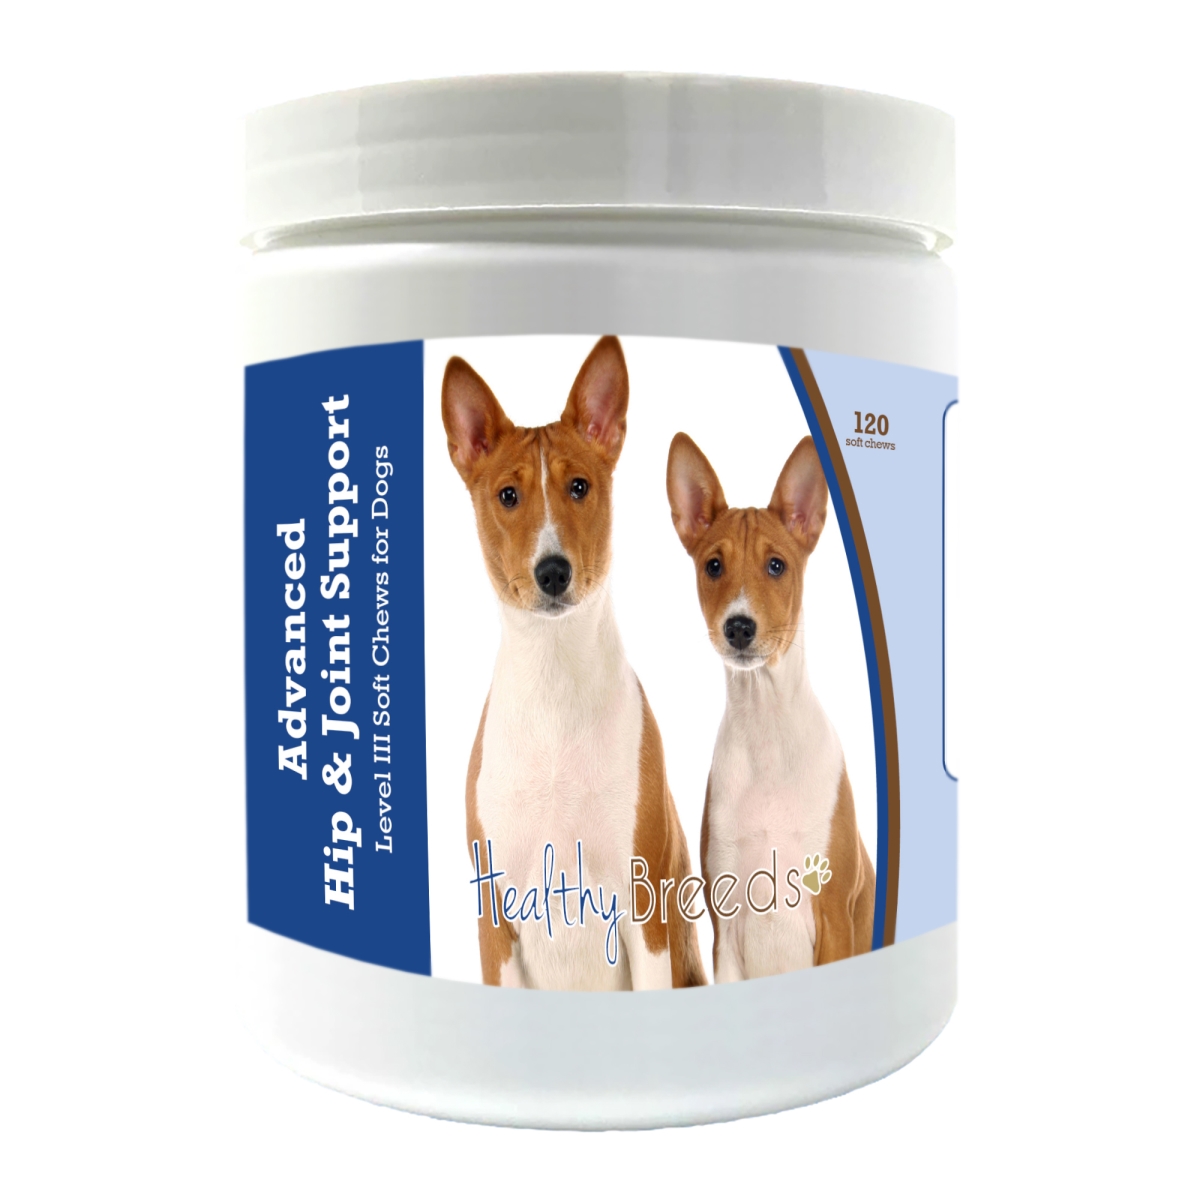 Picture of Healthy Breeds 192959897784 Basenji Advanced Hip & Joint Support Level III Soft Chews for Dogs